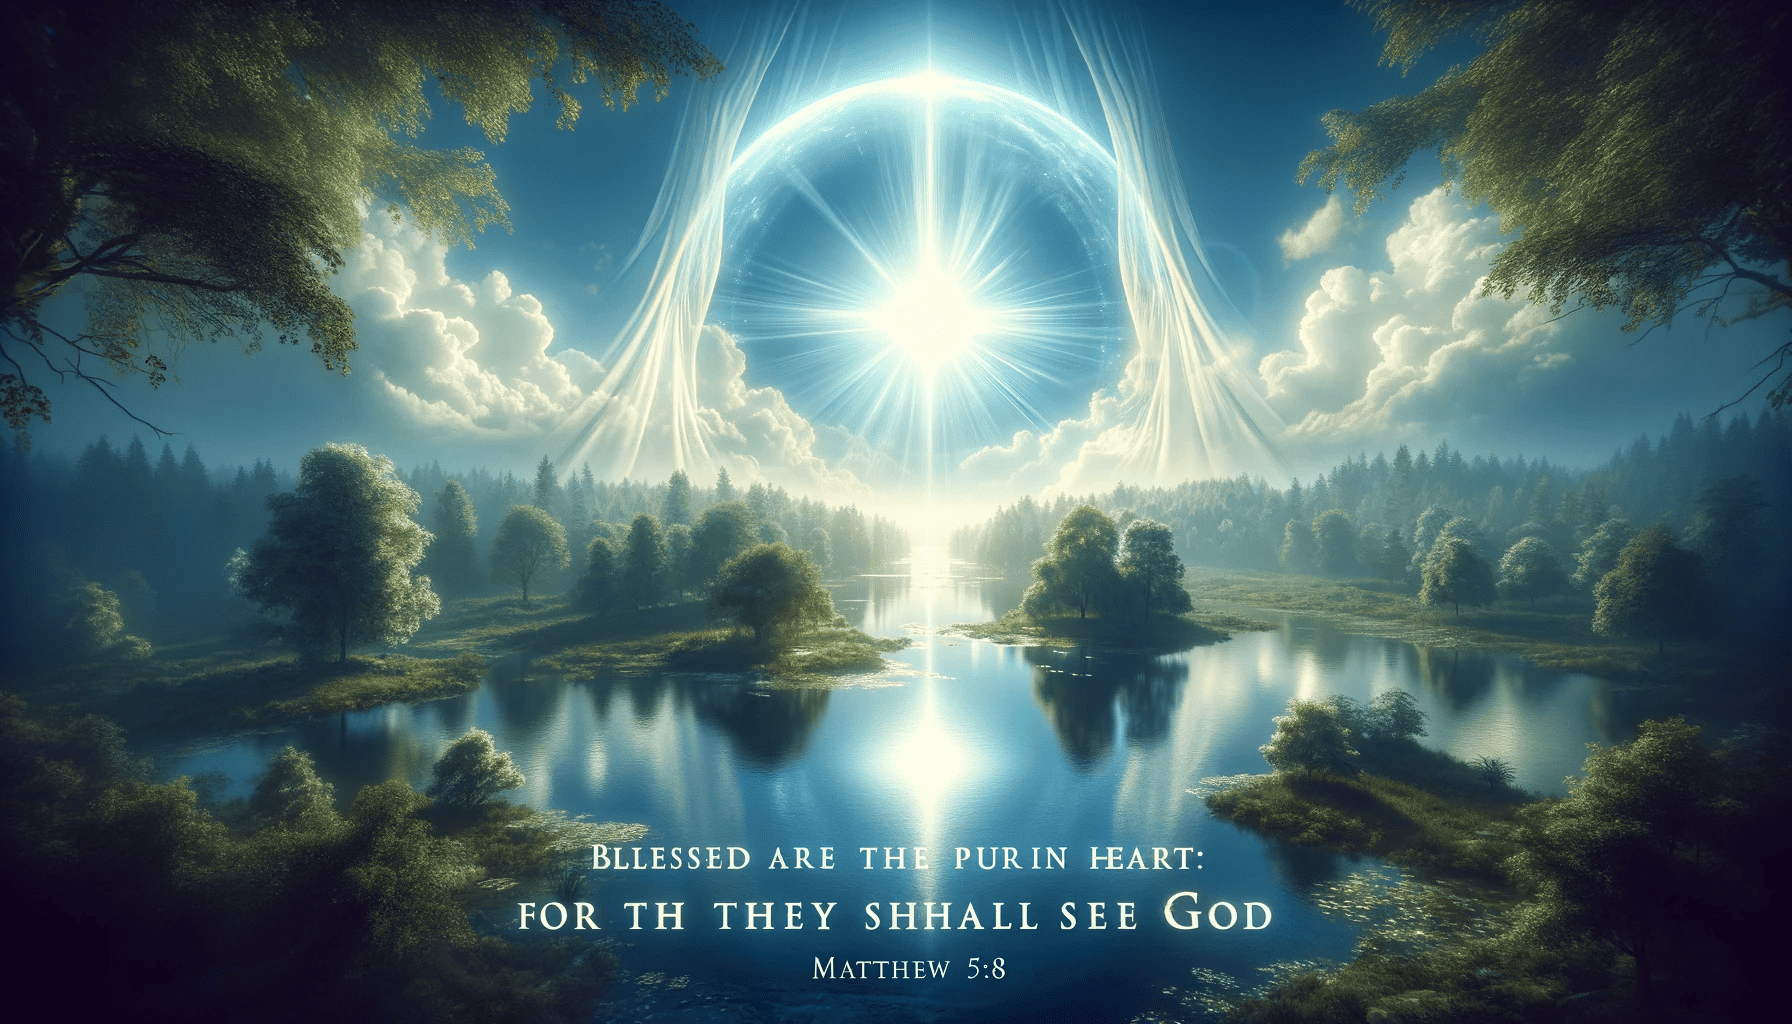 Blessed are the pure in heart: for they shall see God